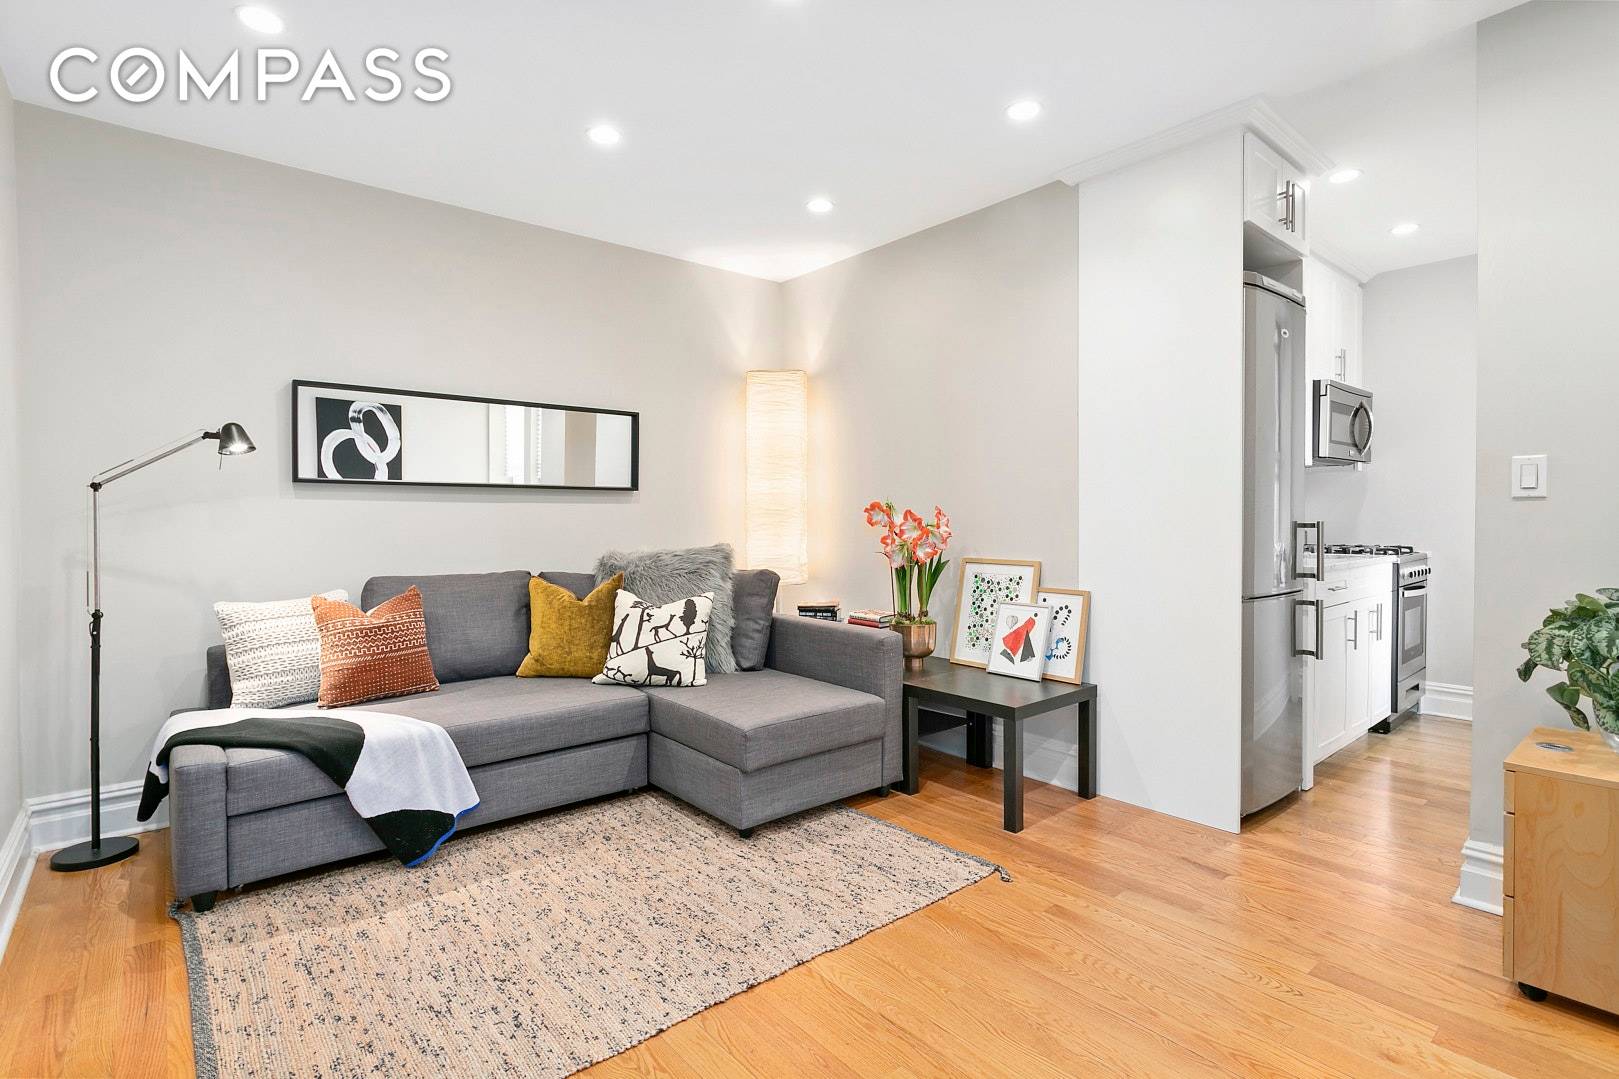 This is a fully Renovated pristine one bedroom, one bath apartment with all new hardwood floors, recessed lighting, marble countertops, stainless steel appliances, great closet space and a glass tiled ...